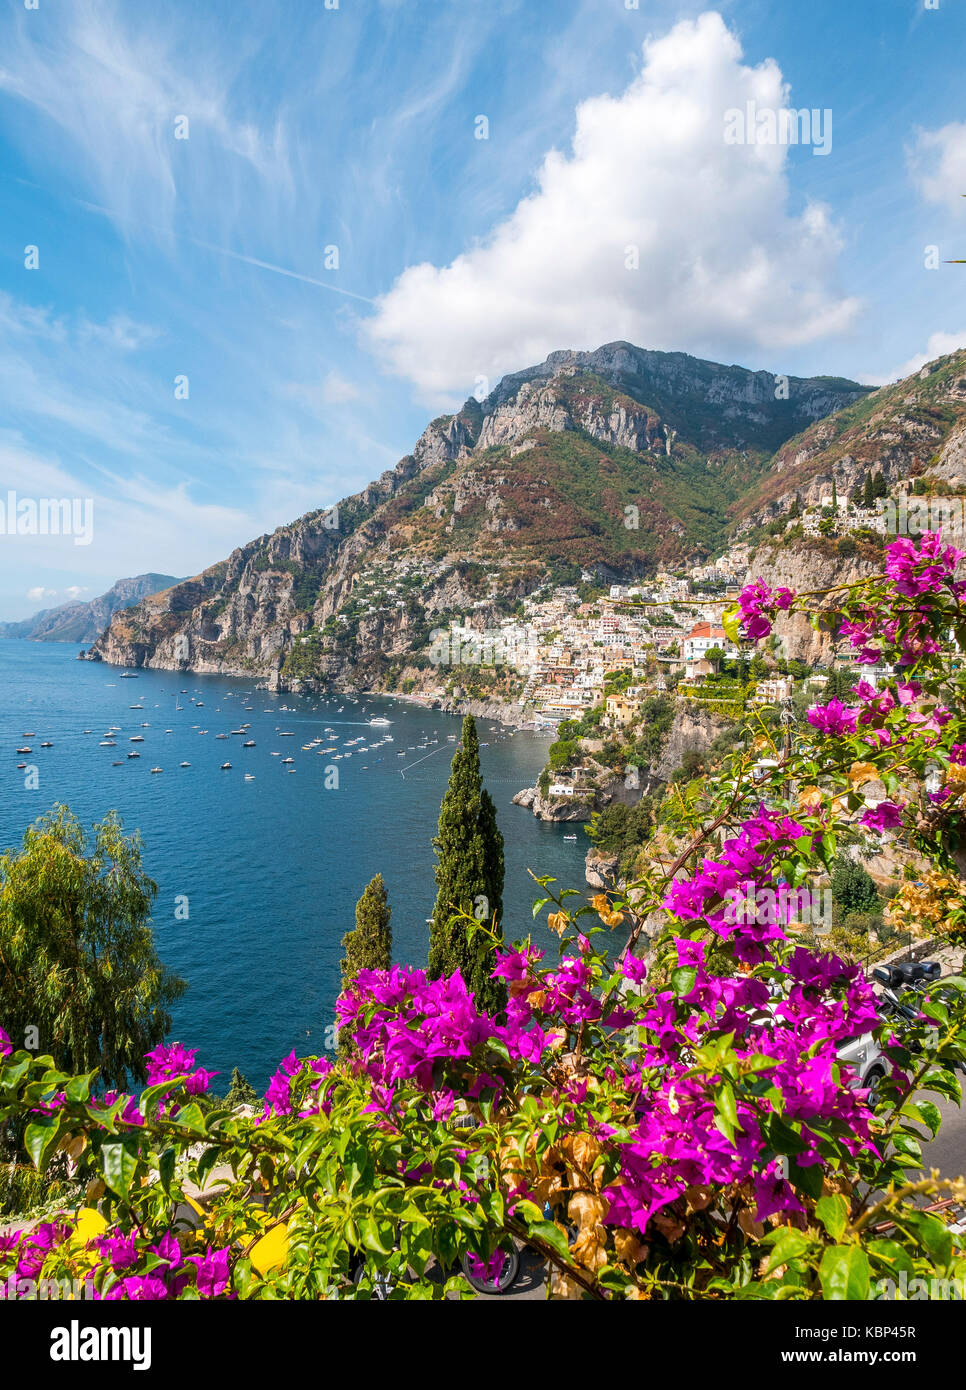 The homes of Positano cling to the bay and cliffs on the Amalfi coast in Italy Stock Photo